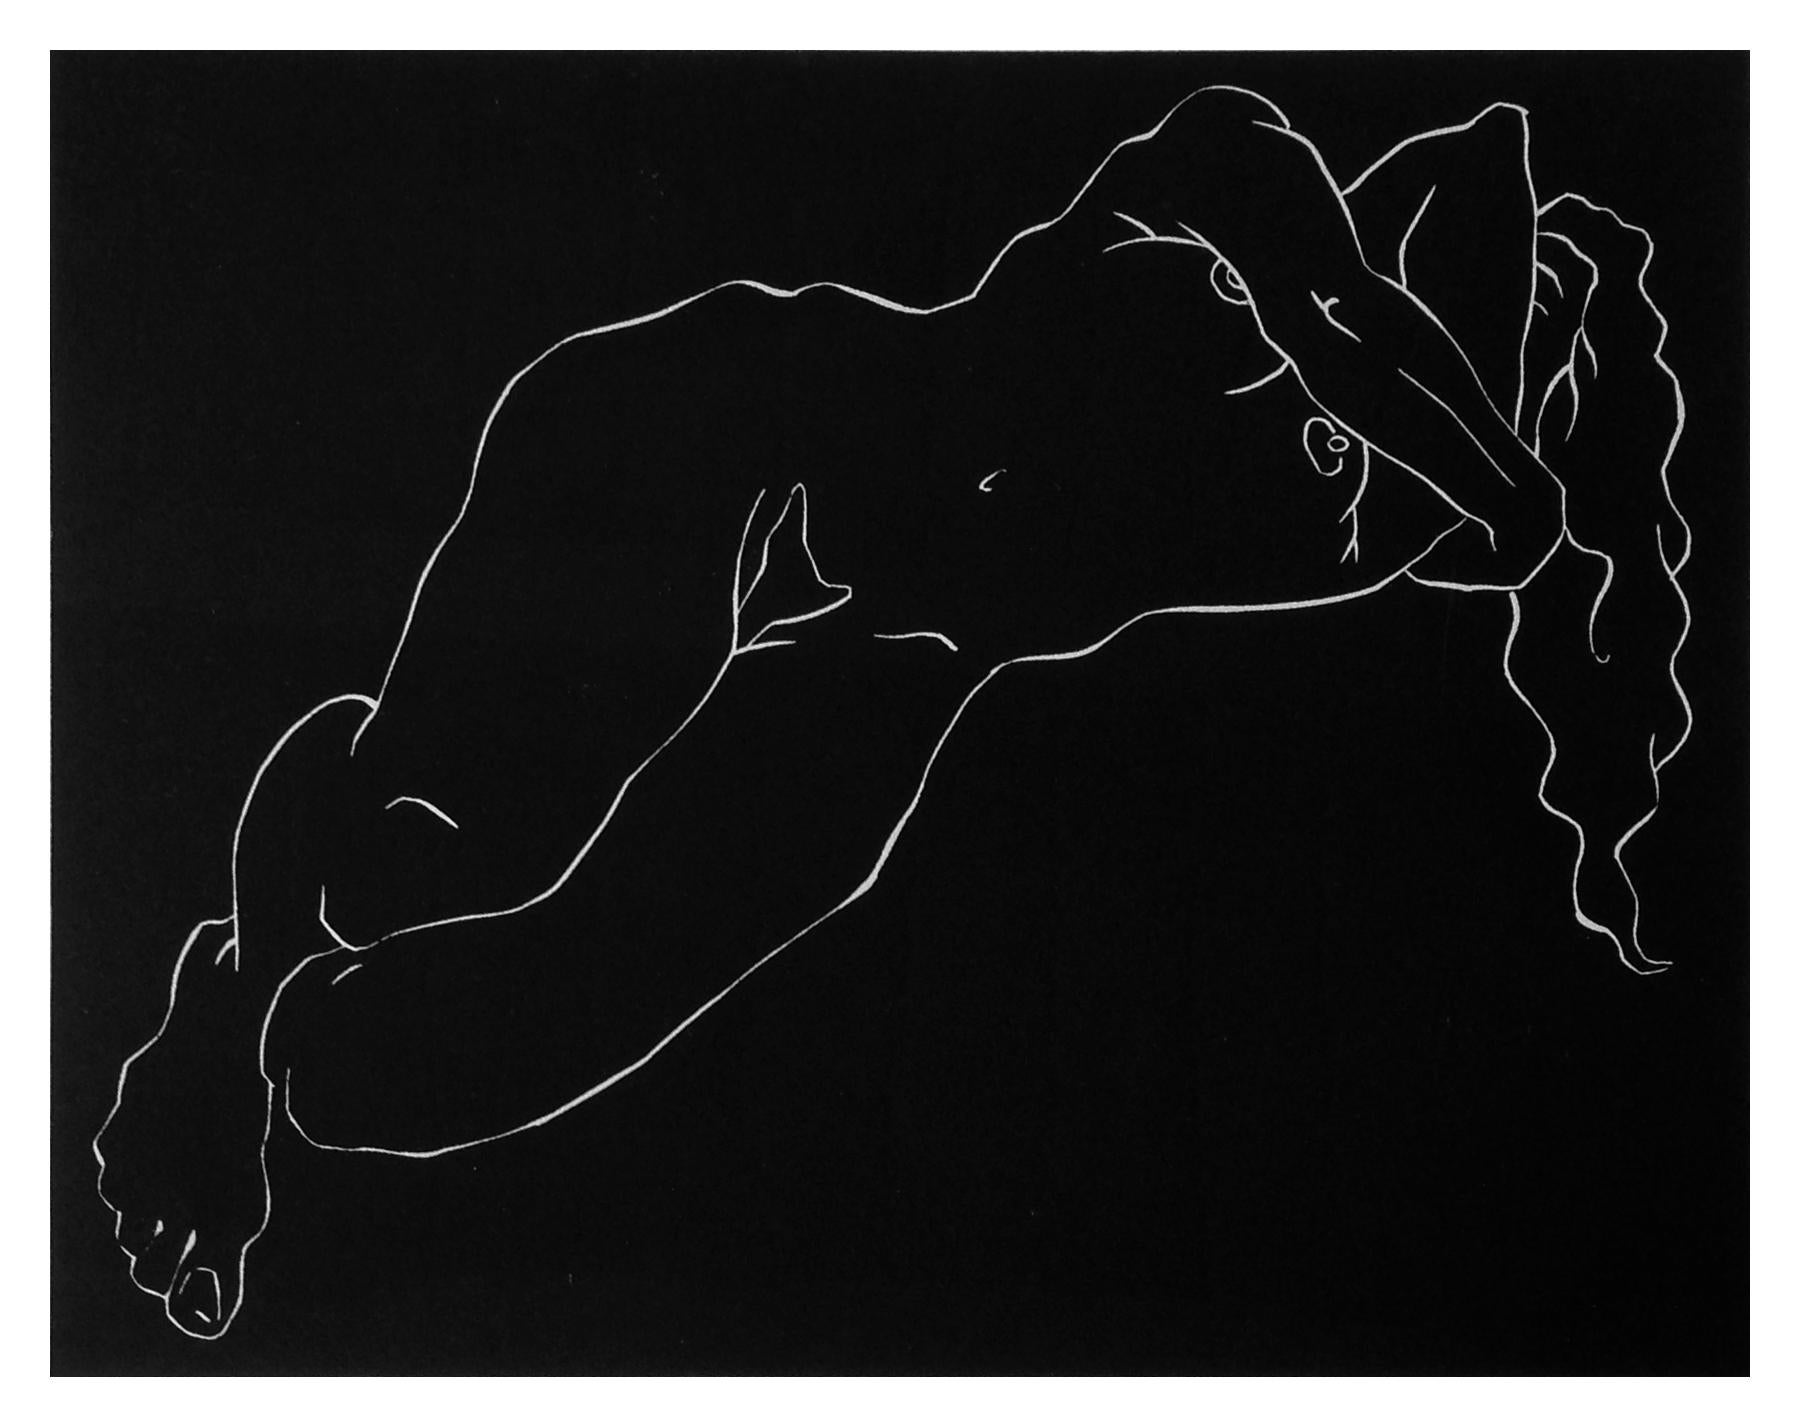 Signed and numbered linocut, from a series of 4 male and female nudes.

Reyes attended The School of the Art Institute of Chicago, where he received a Bachelor of Fine Arts degree in 1997. After moving back to California, he opened his studio in